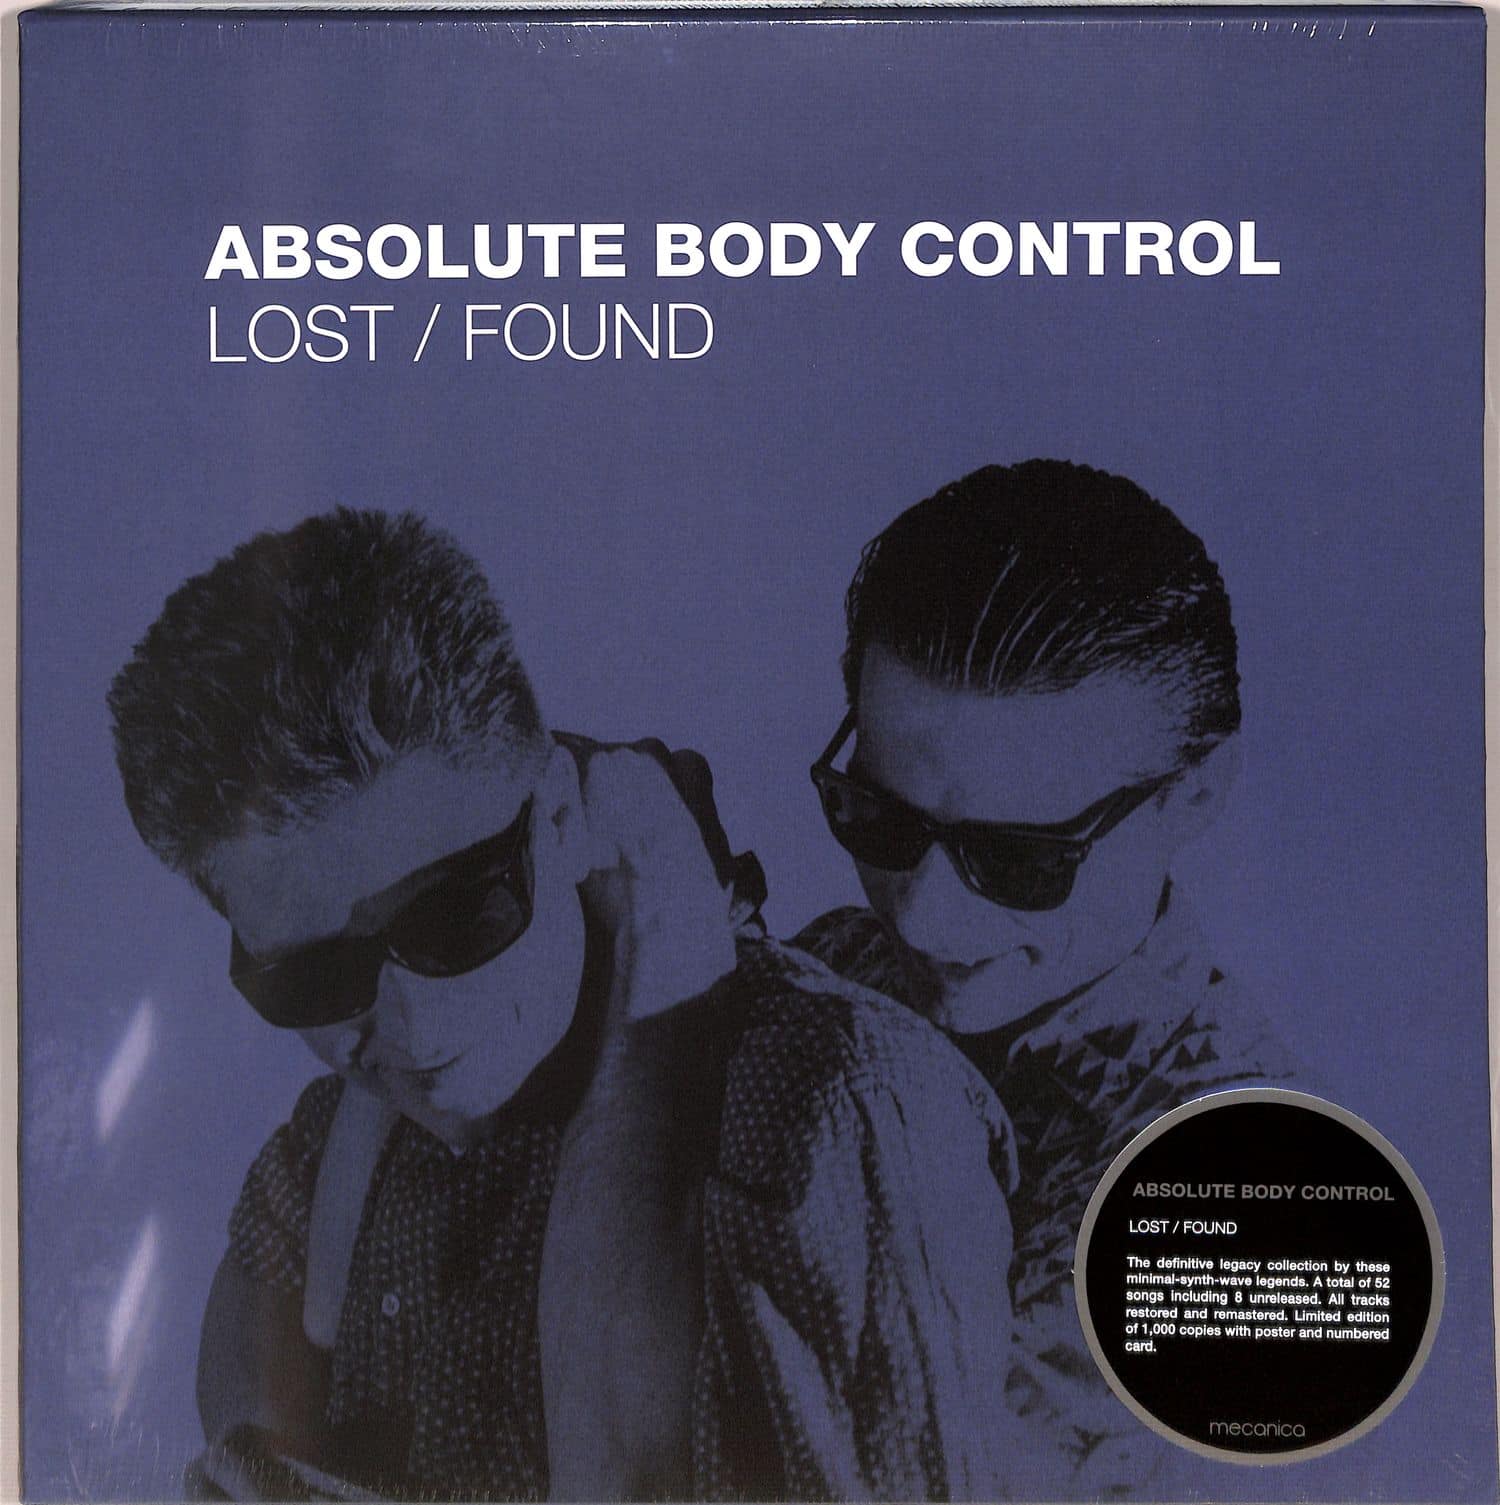 Absolute Body Control - LOST / FOUND 